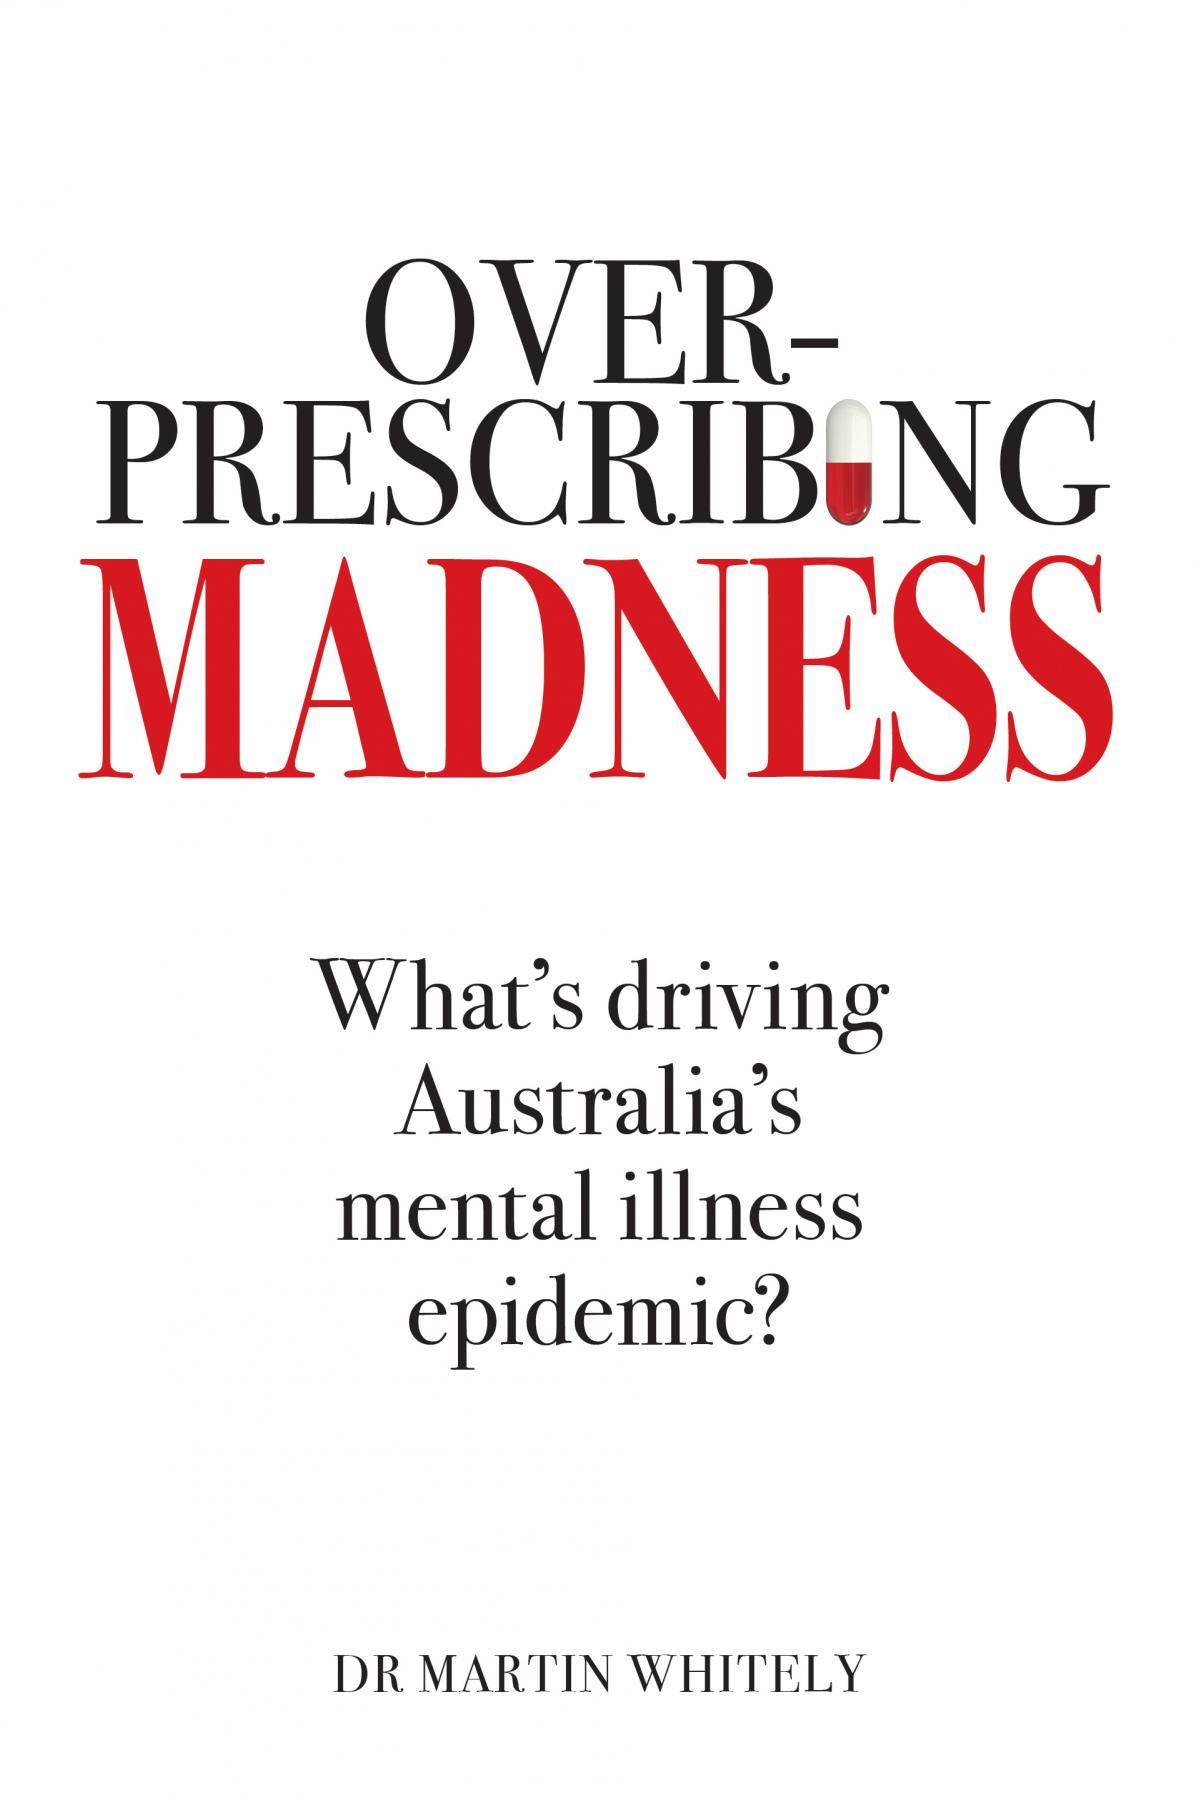 Over-prescribing Madness book by Dr Martin Whitely